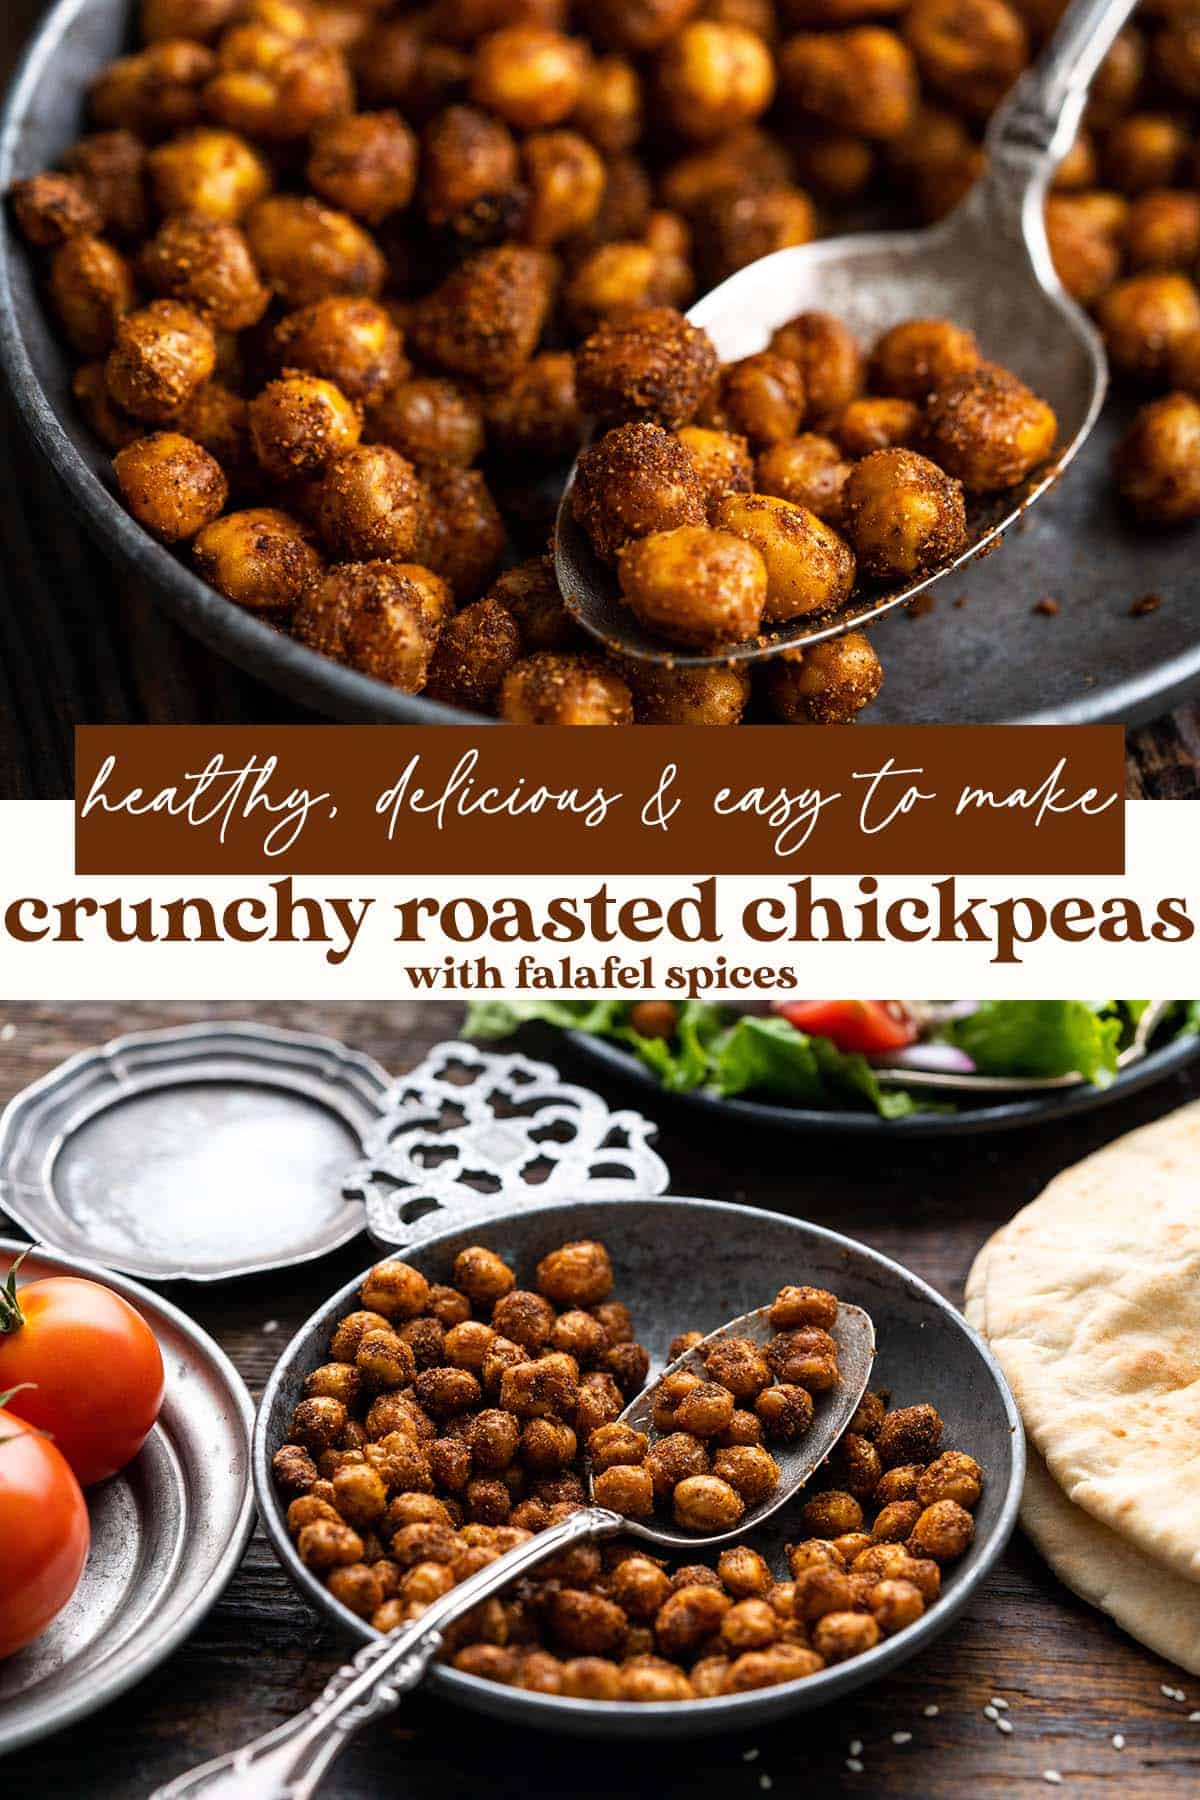 crunchy roasted chickpeas recipe pin